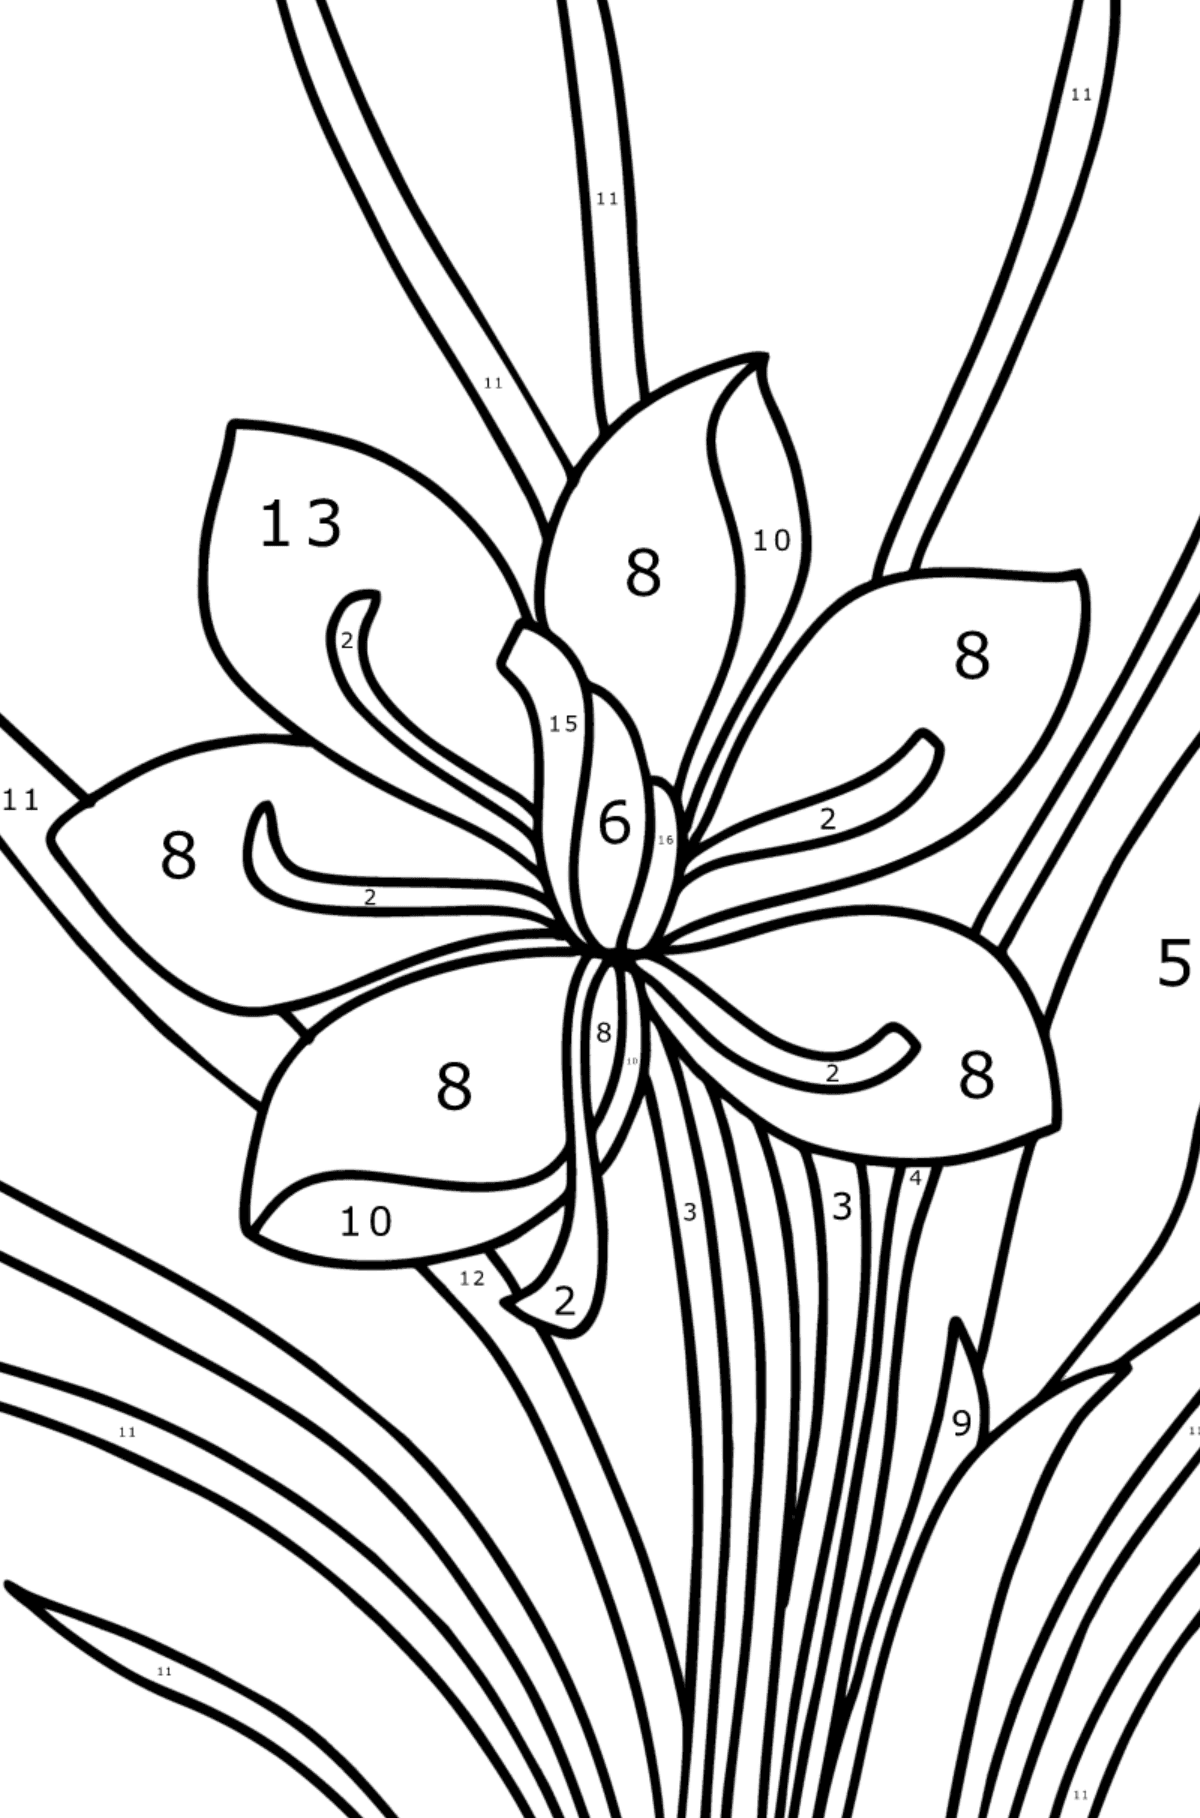 Crocus coloring page - Coloring by Numbers for Kids